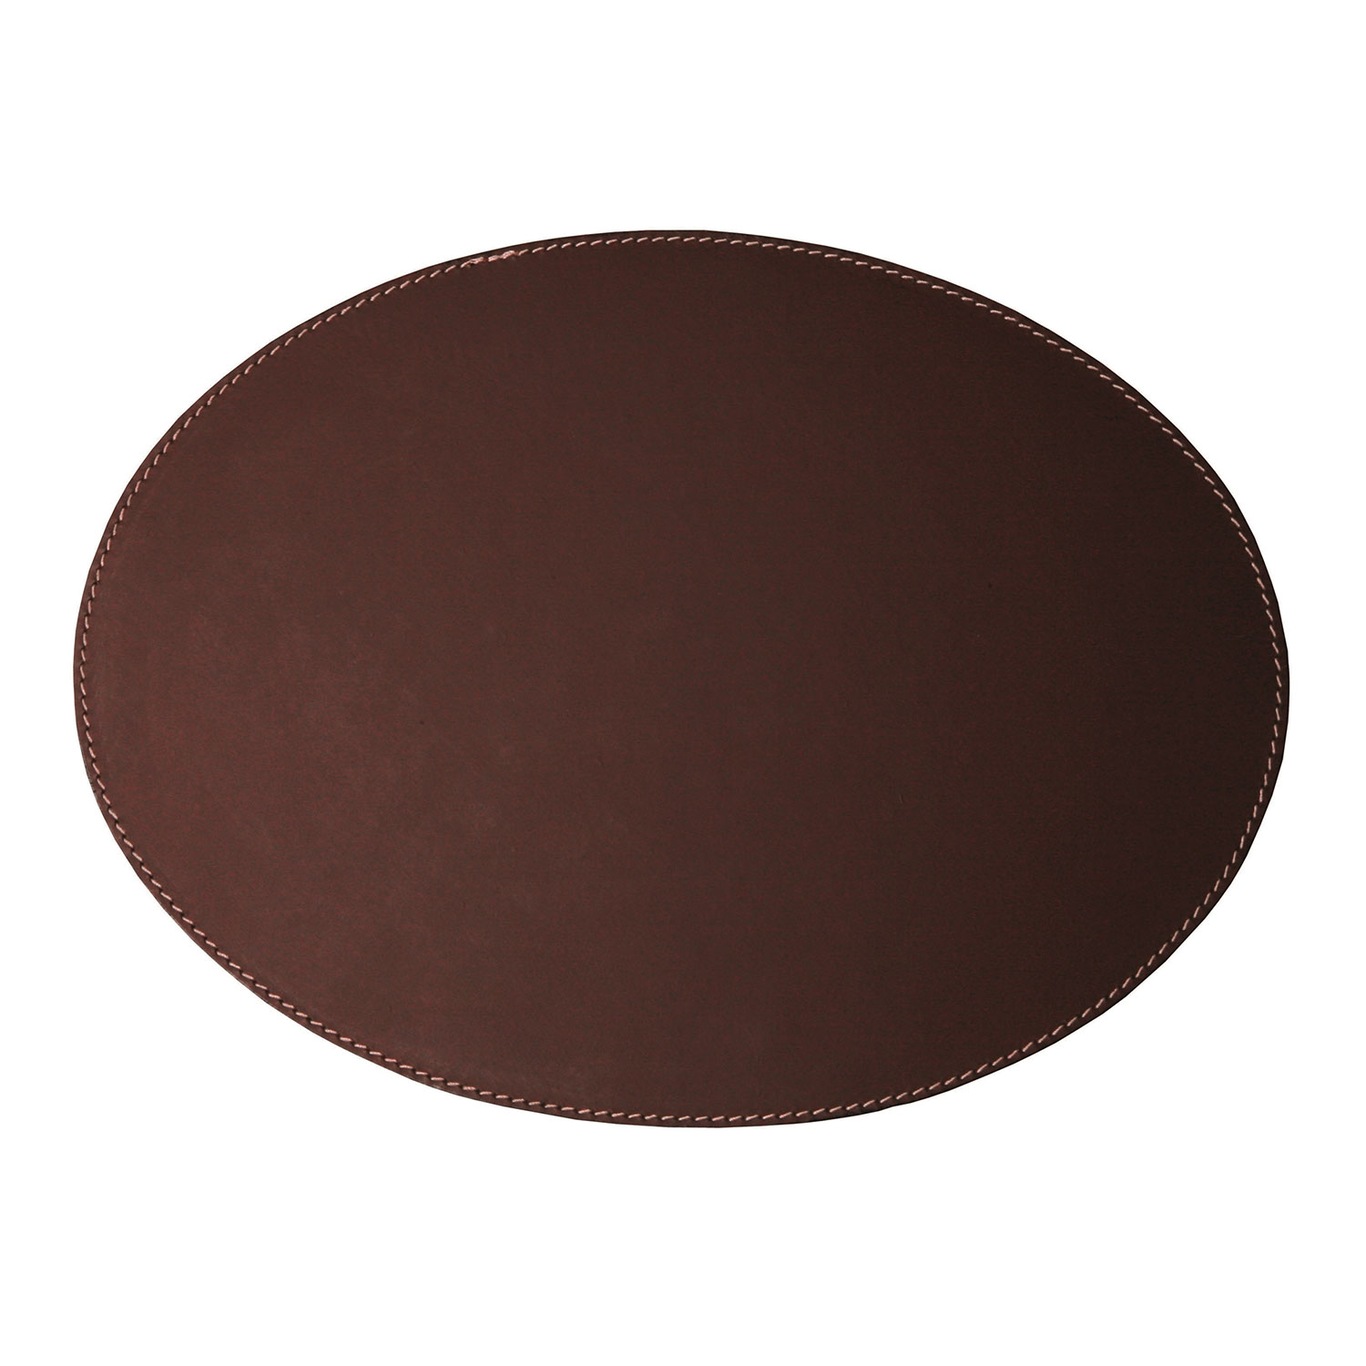 Placemat Oval 35x48cm, Chocolate